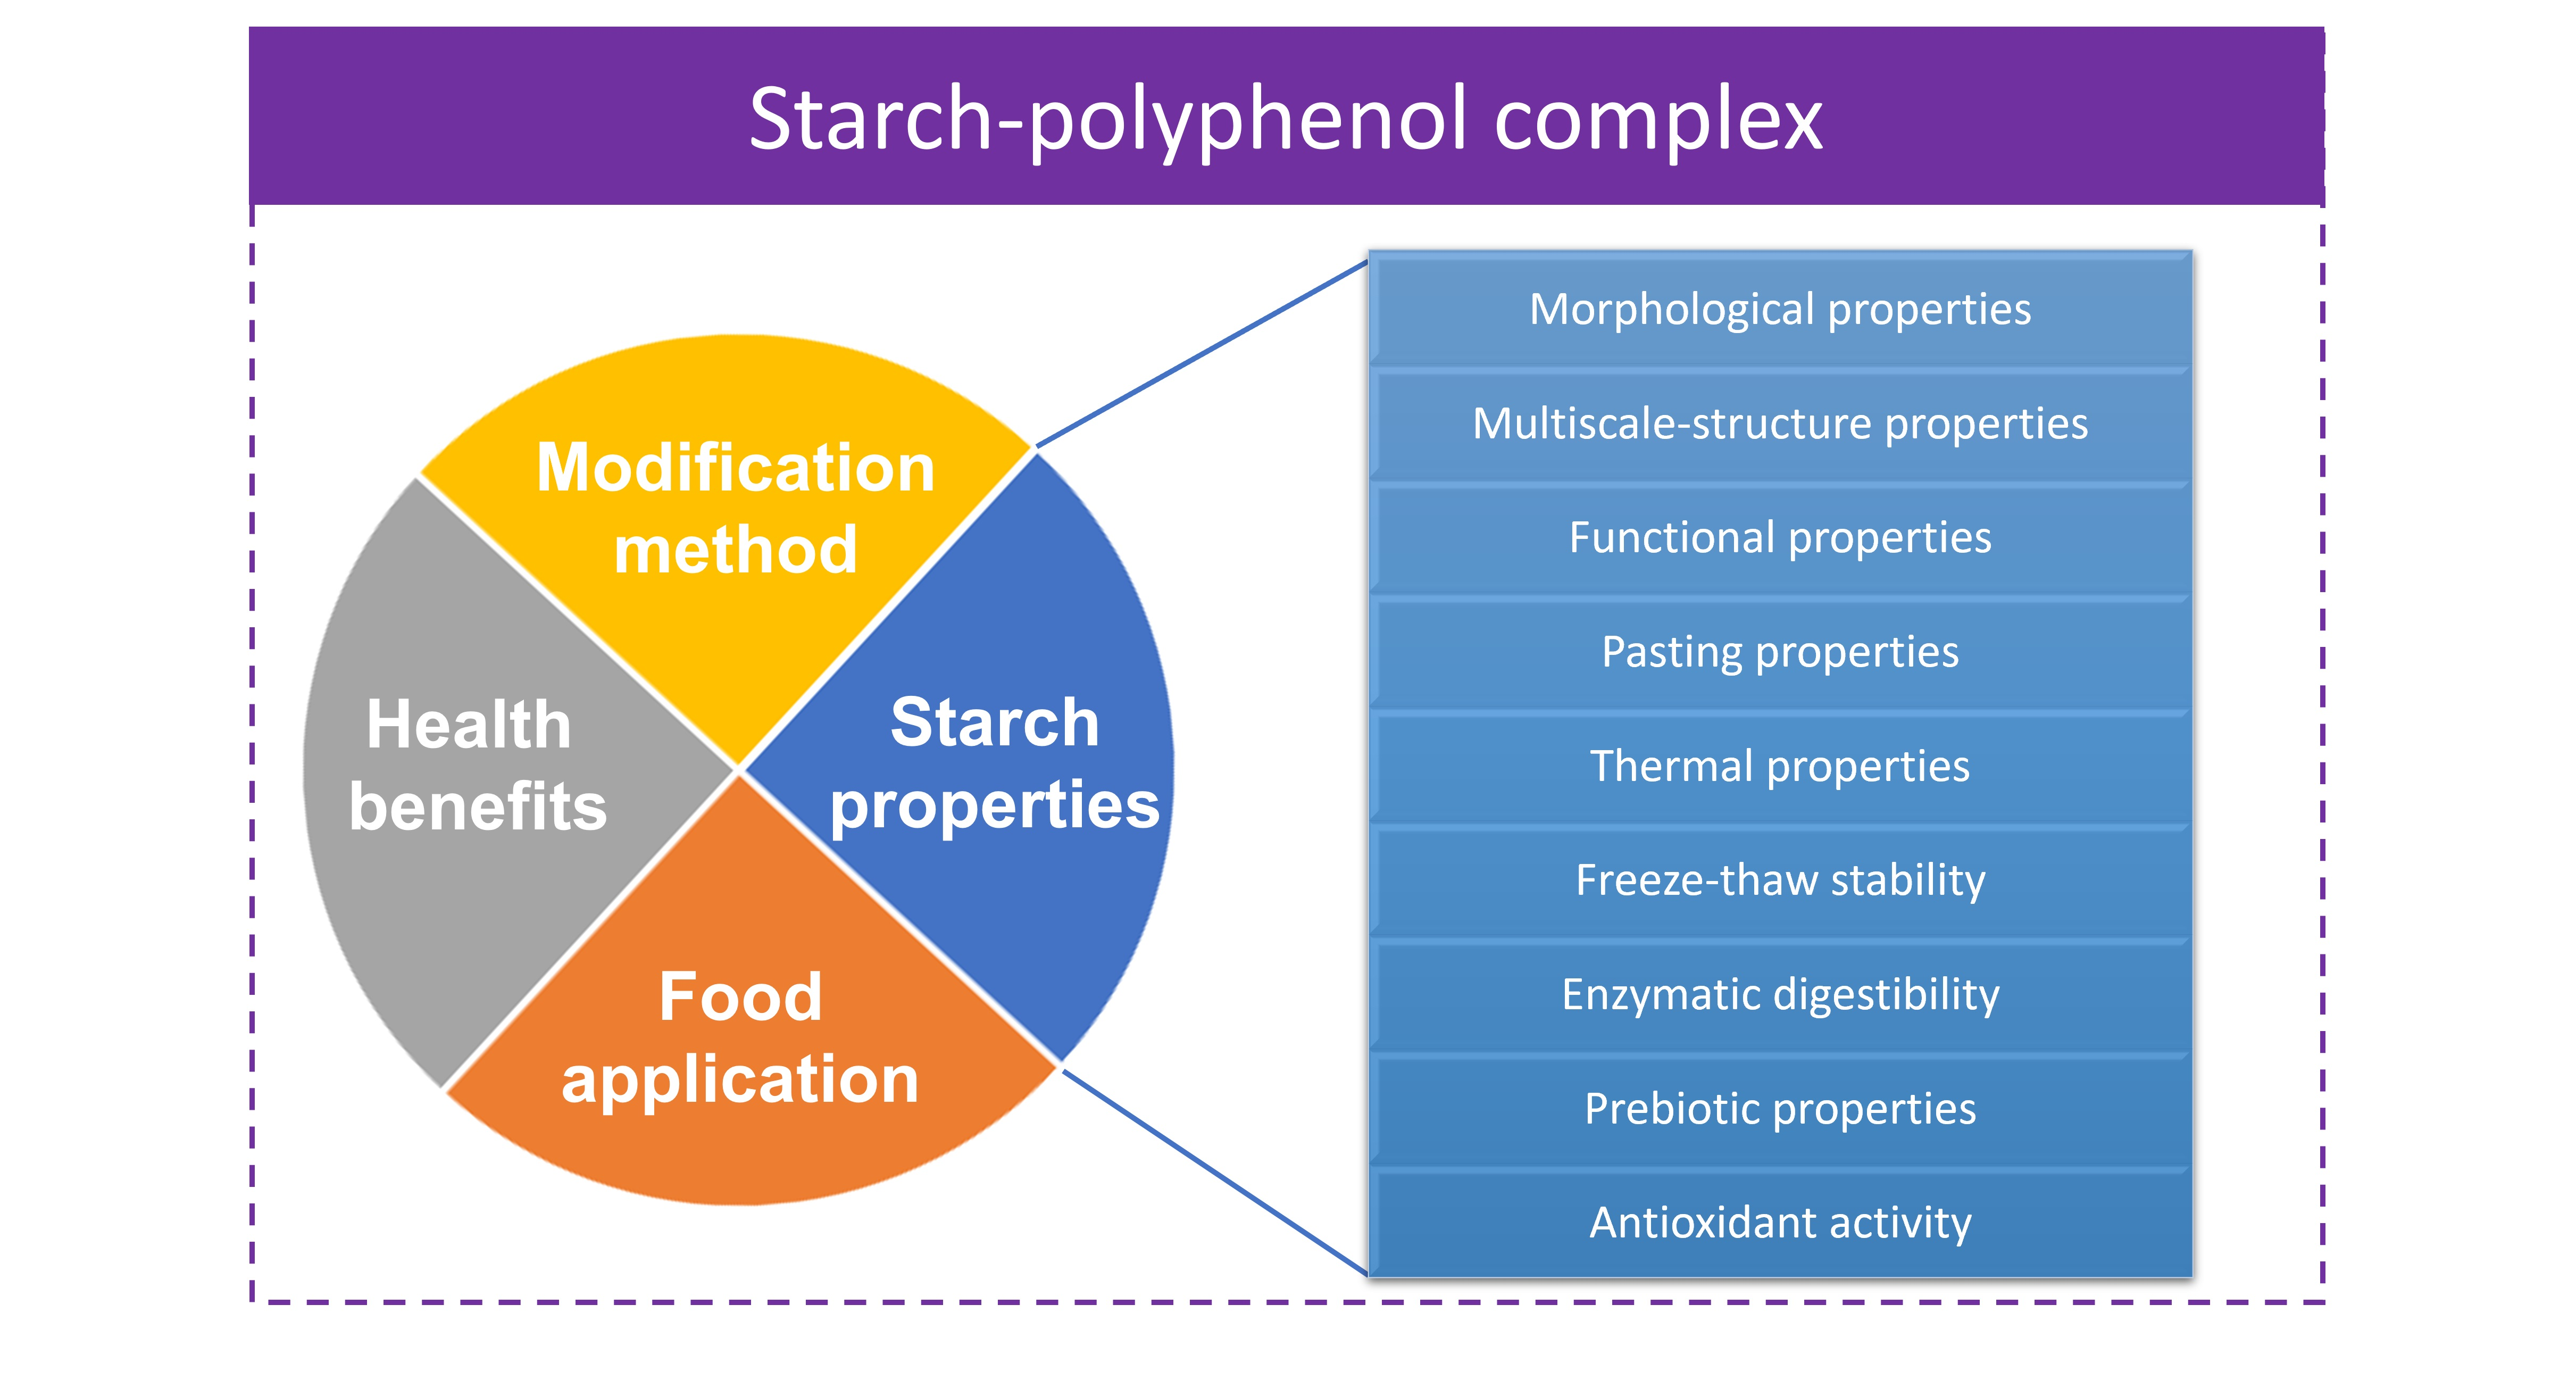 Isolation and characterisation of rye starch - ScienceDirect